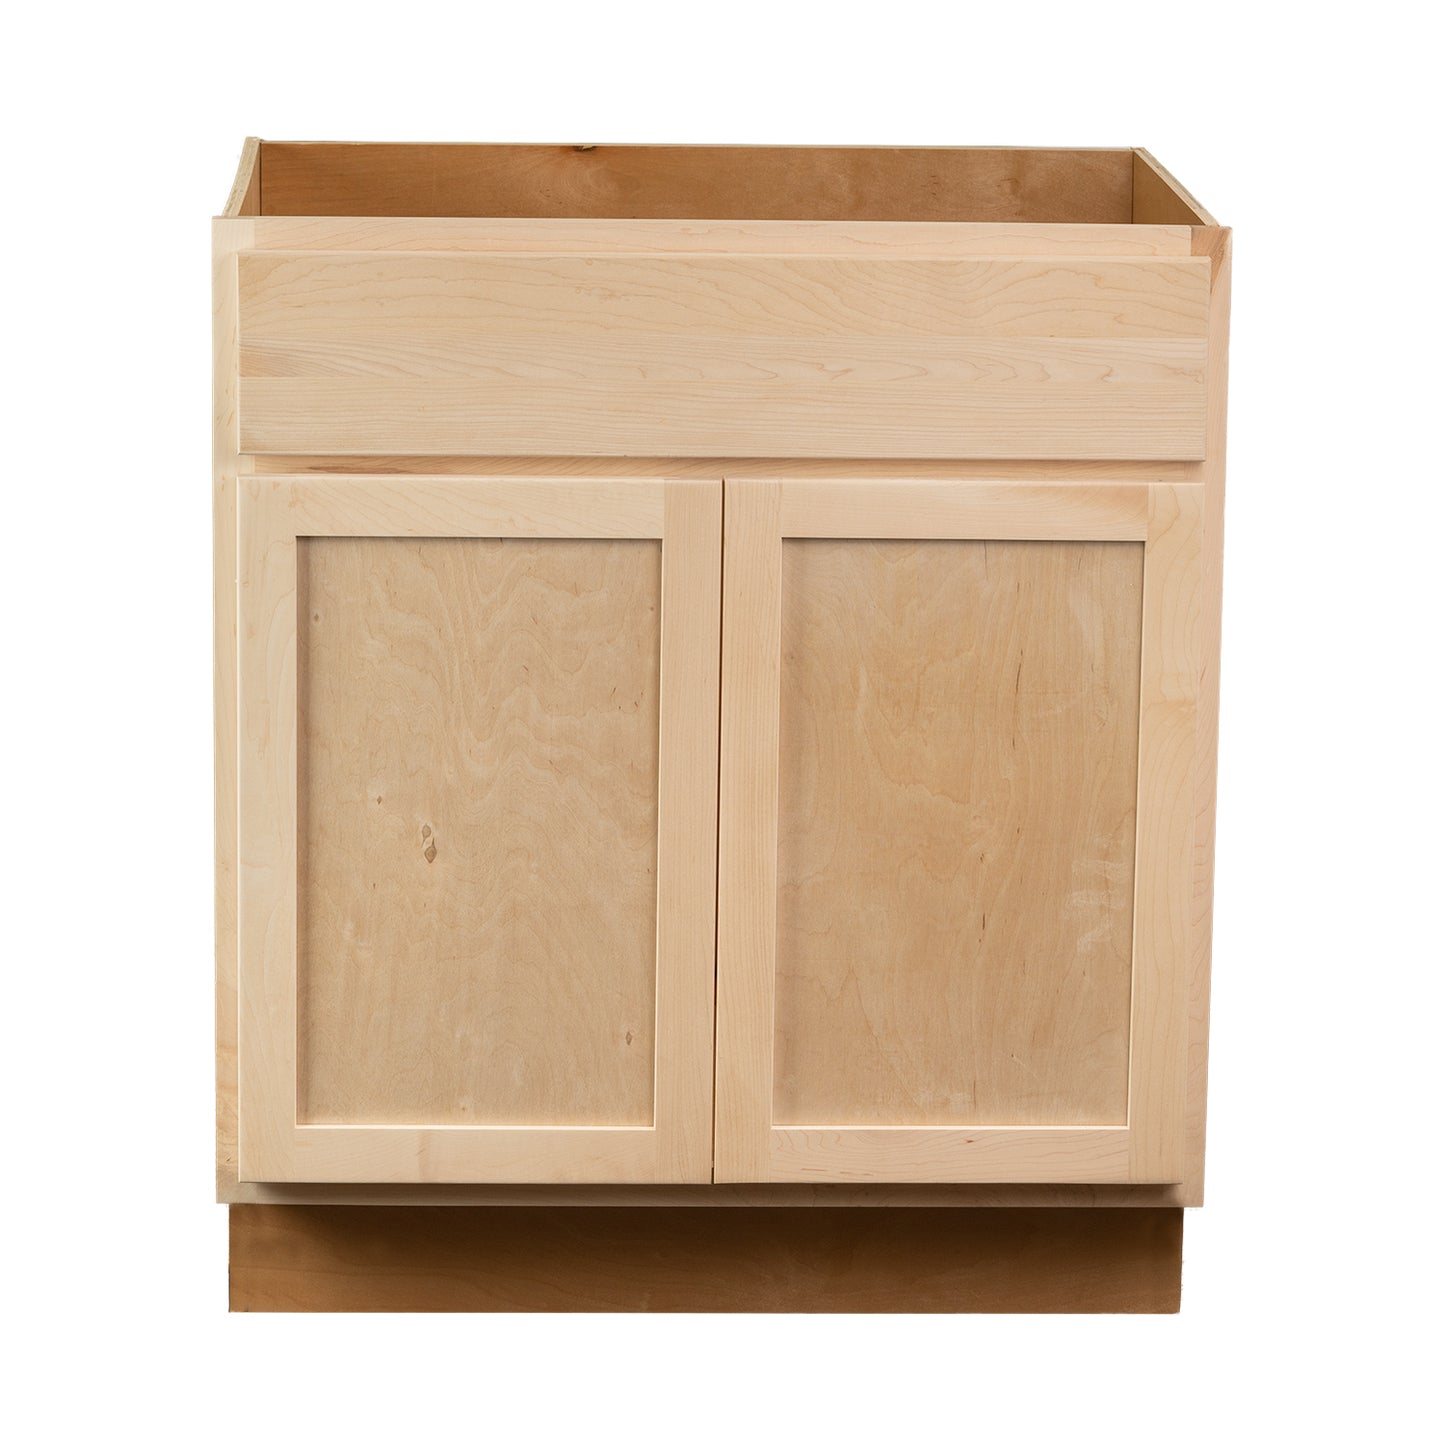 Quicklock RTA (Ready-to-Assemble) Raw Maple Vanity Base Cabinet | 24"Wx34.5"Hx21"D